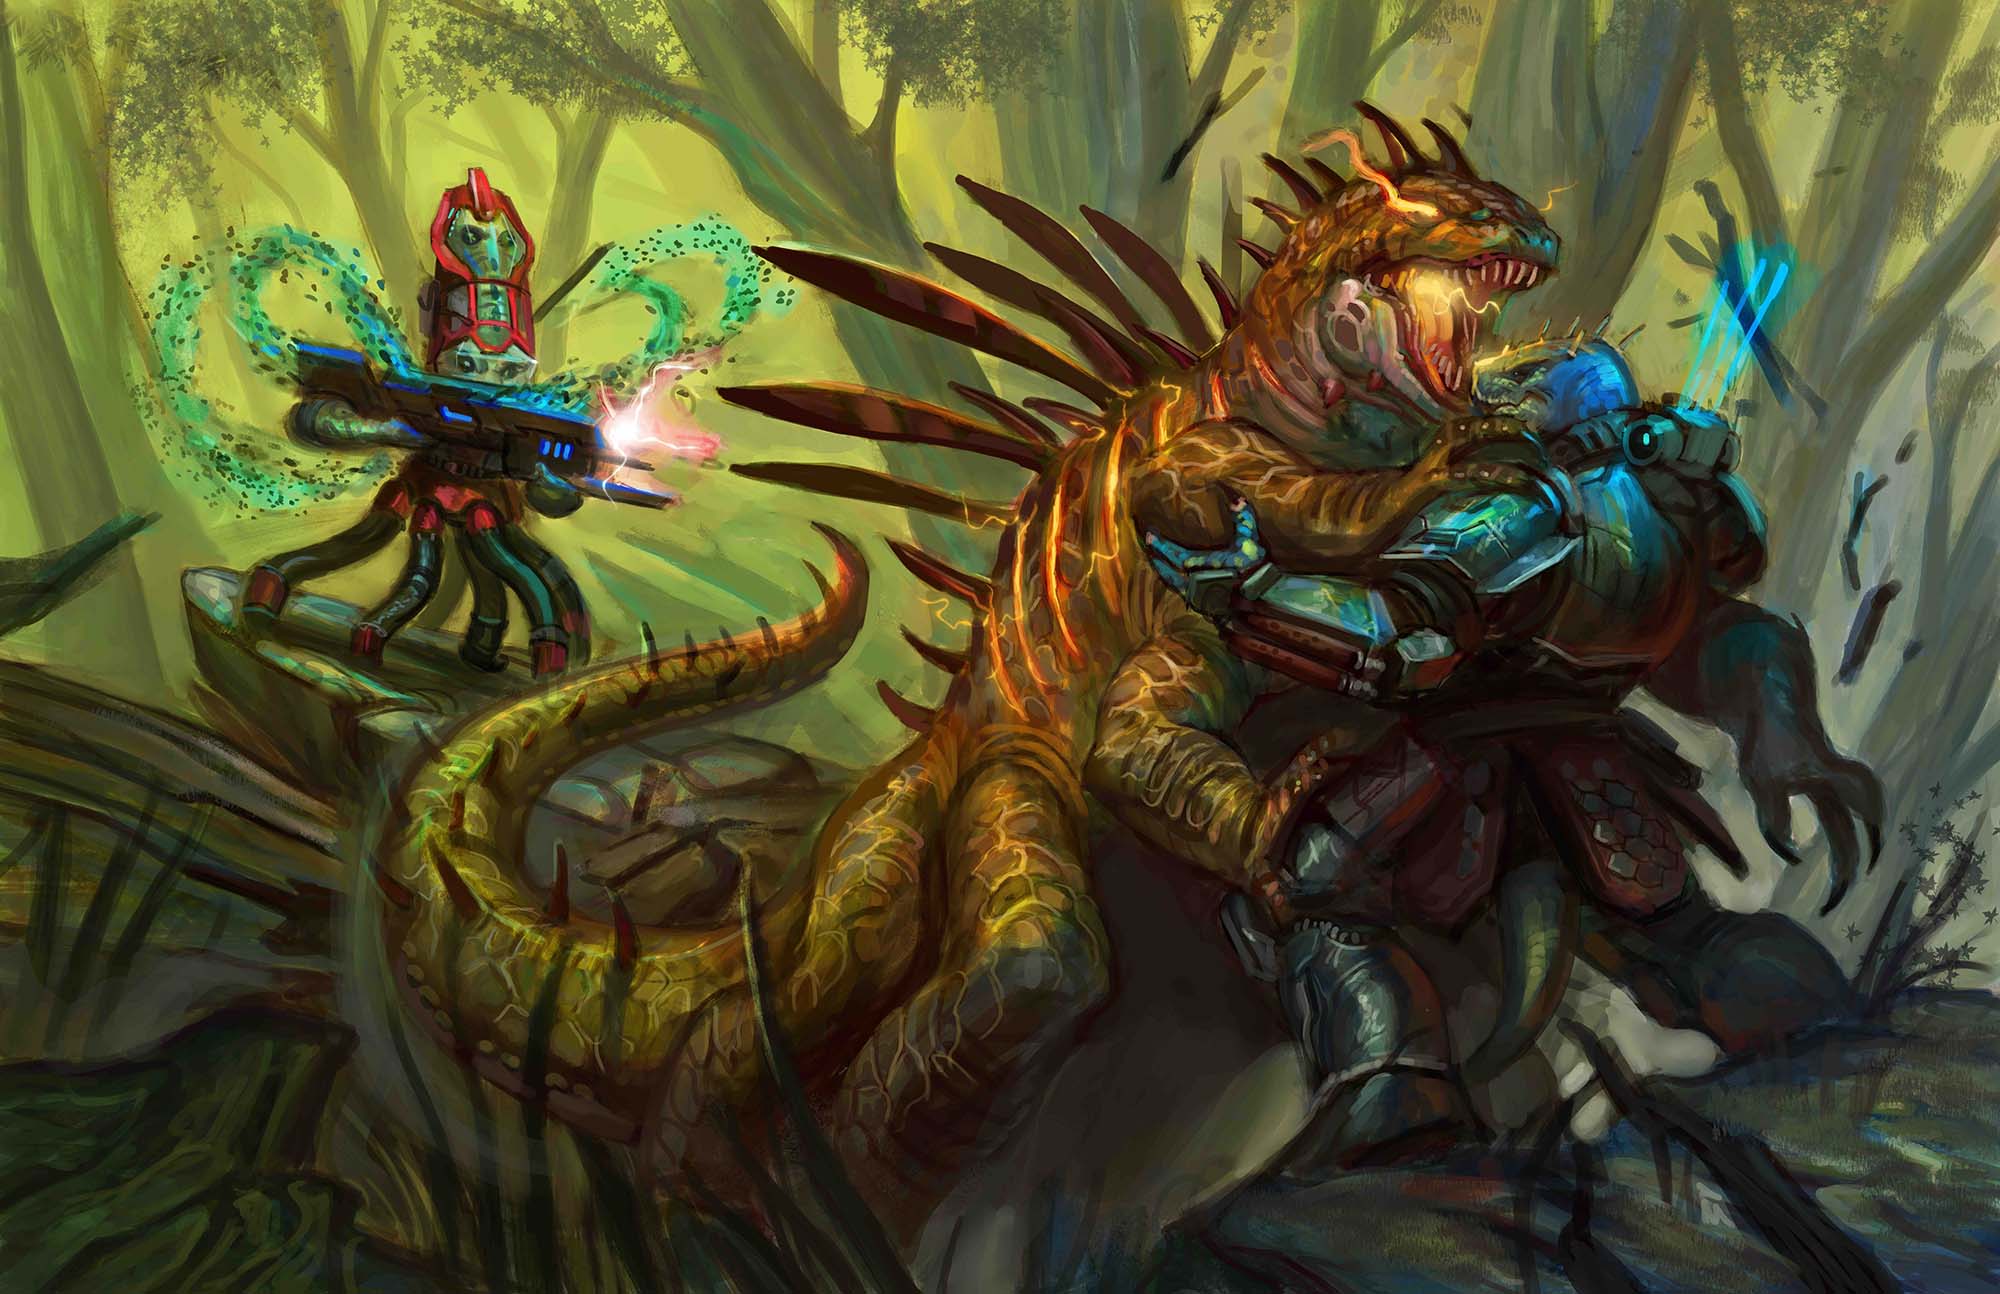 the iconic soldier and iconic nanocyte are battling a large reptile that glows with the color and brightness of plasma